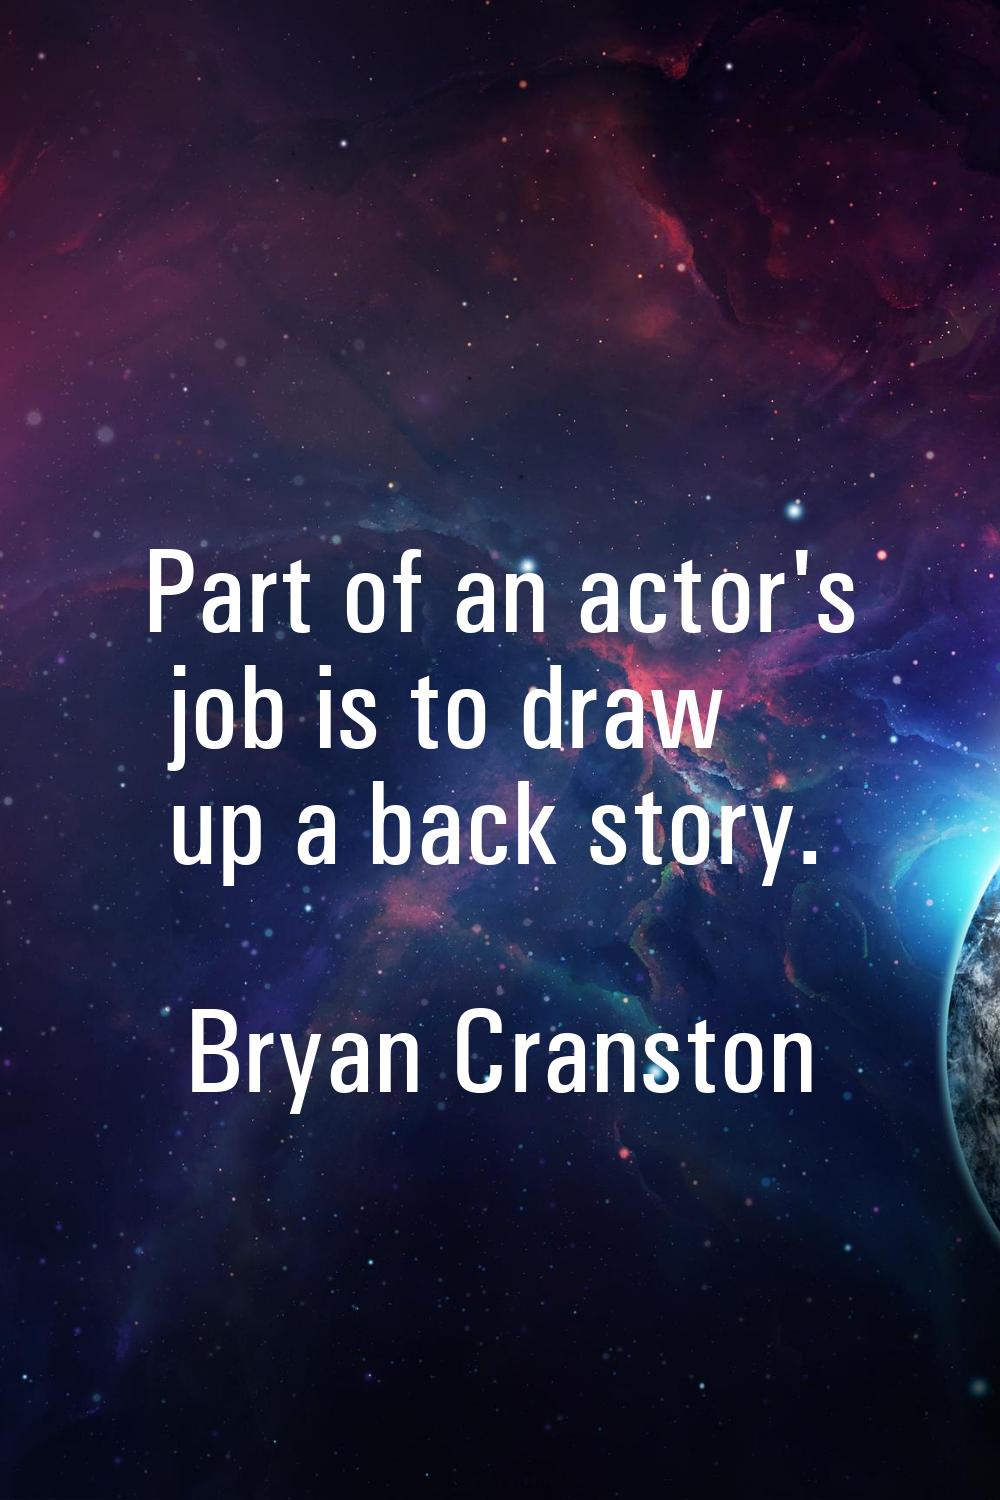 Part of an actor's job is to draw up a back story.